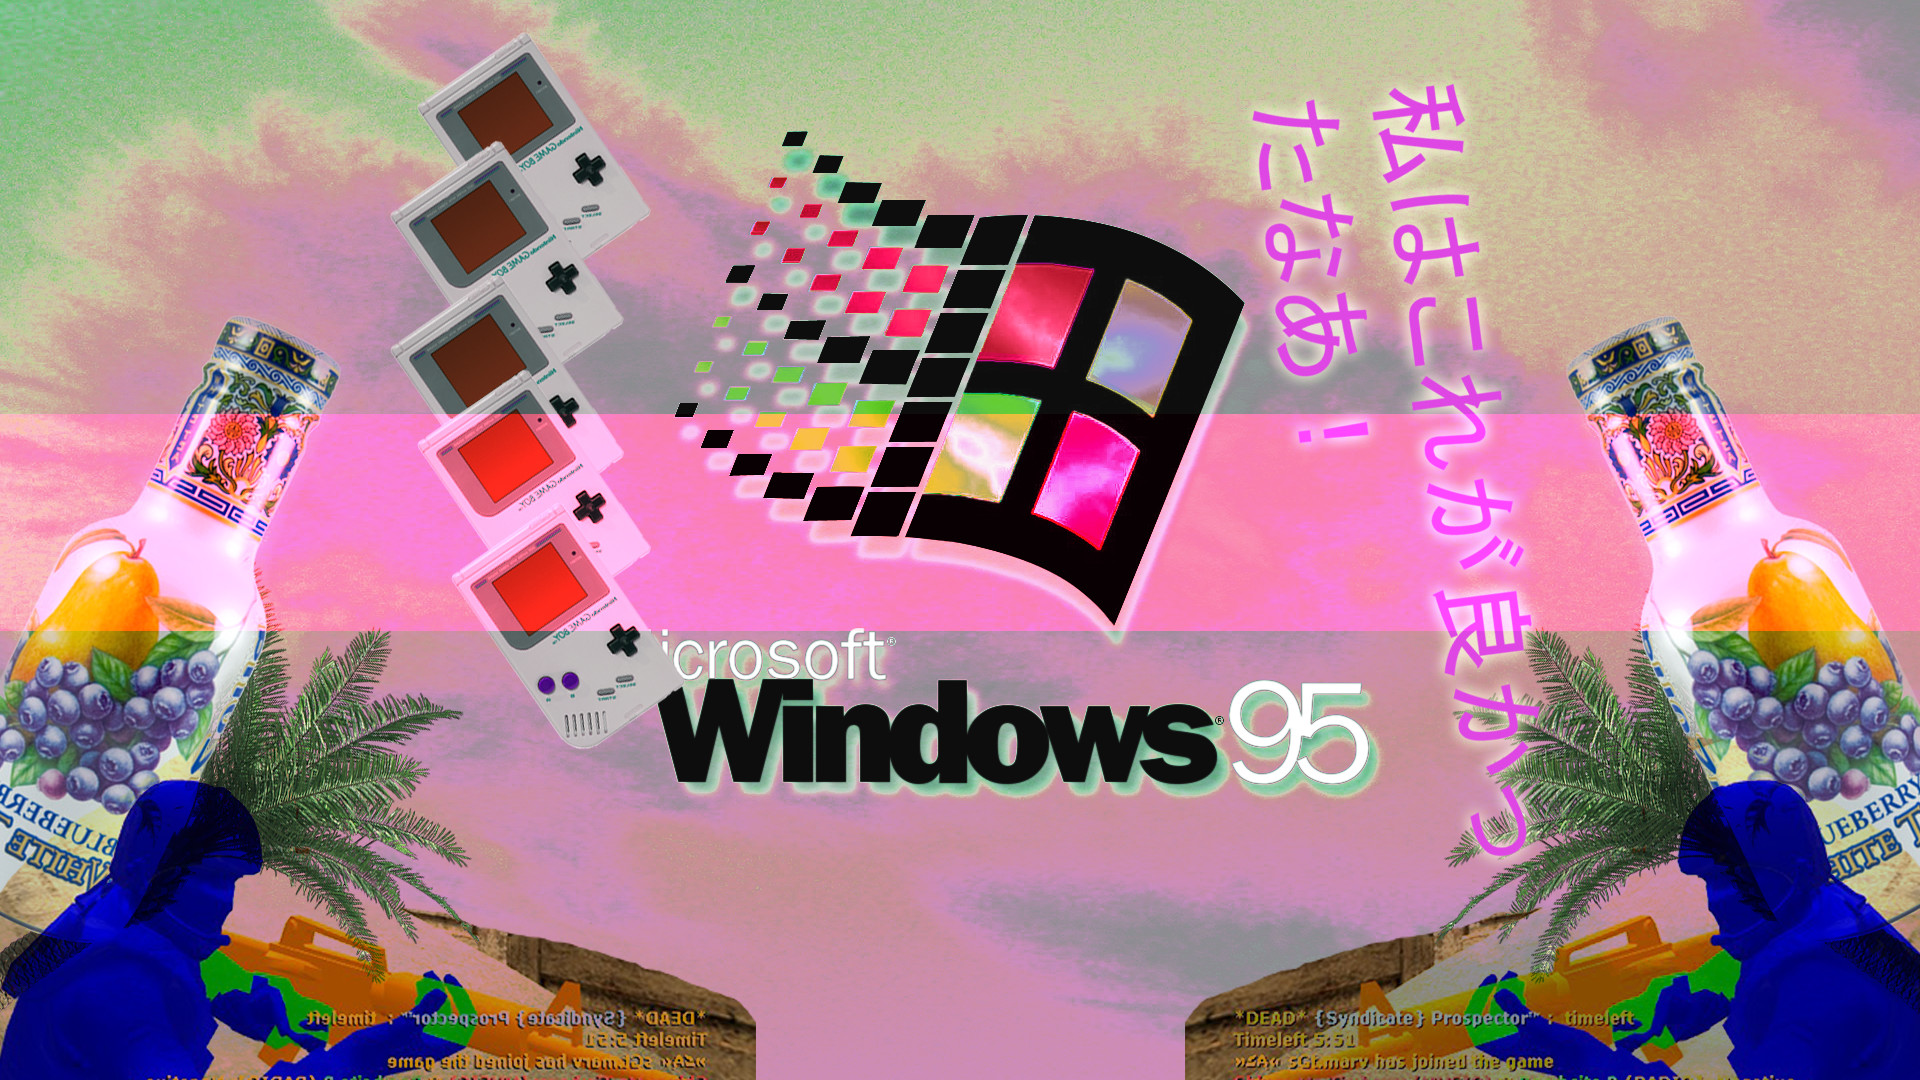 1920x1080 Aesthetic Vaporwave Wallpapers Free For Free Wallpaper